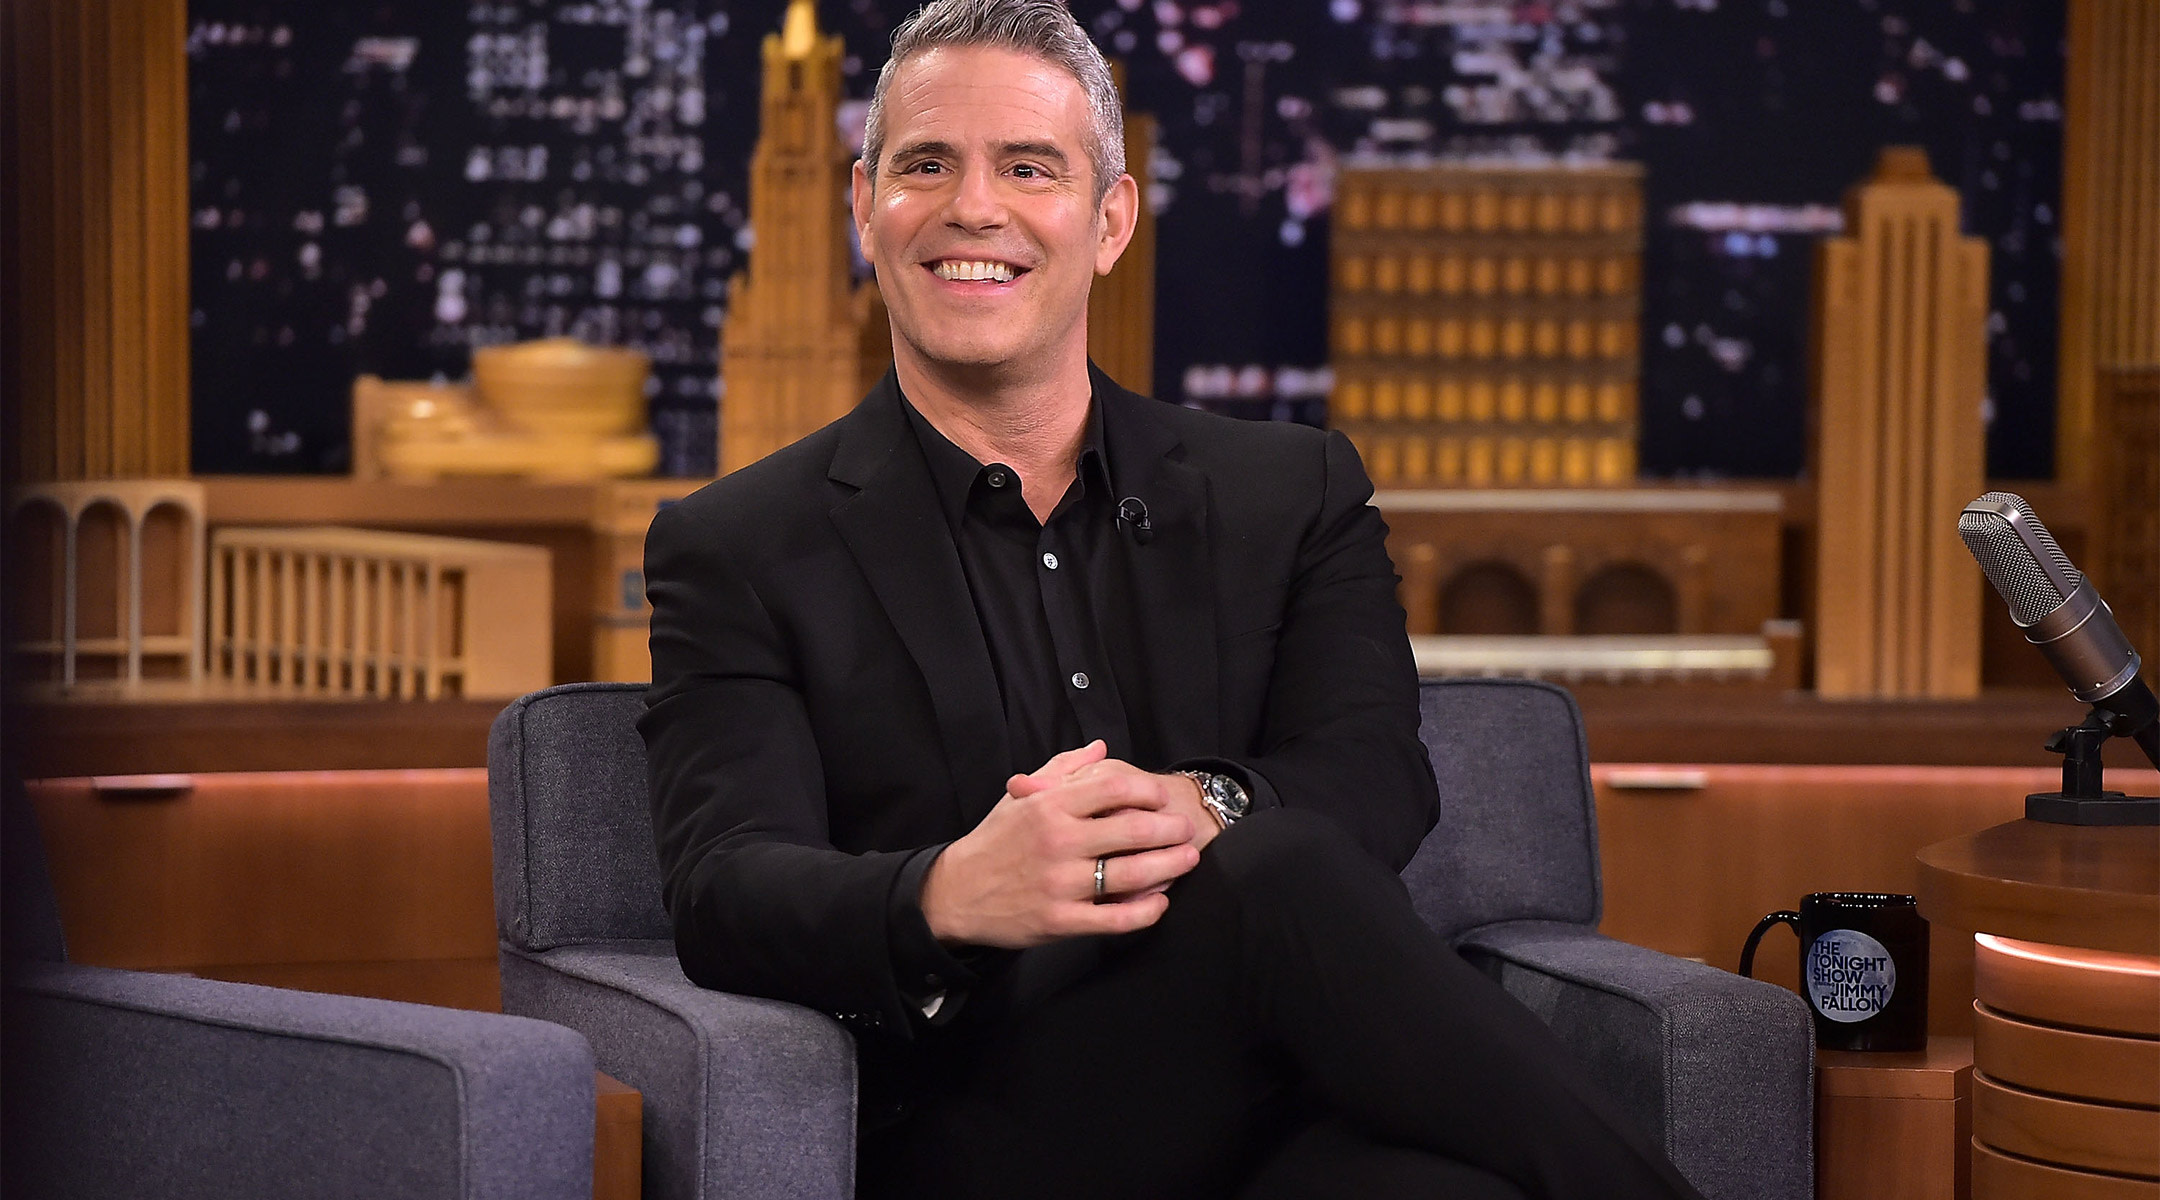 andy cohen announces he will be having a baby via surrogacy